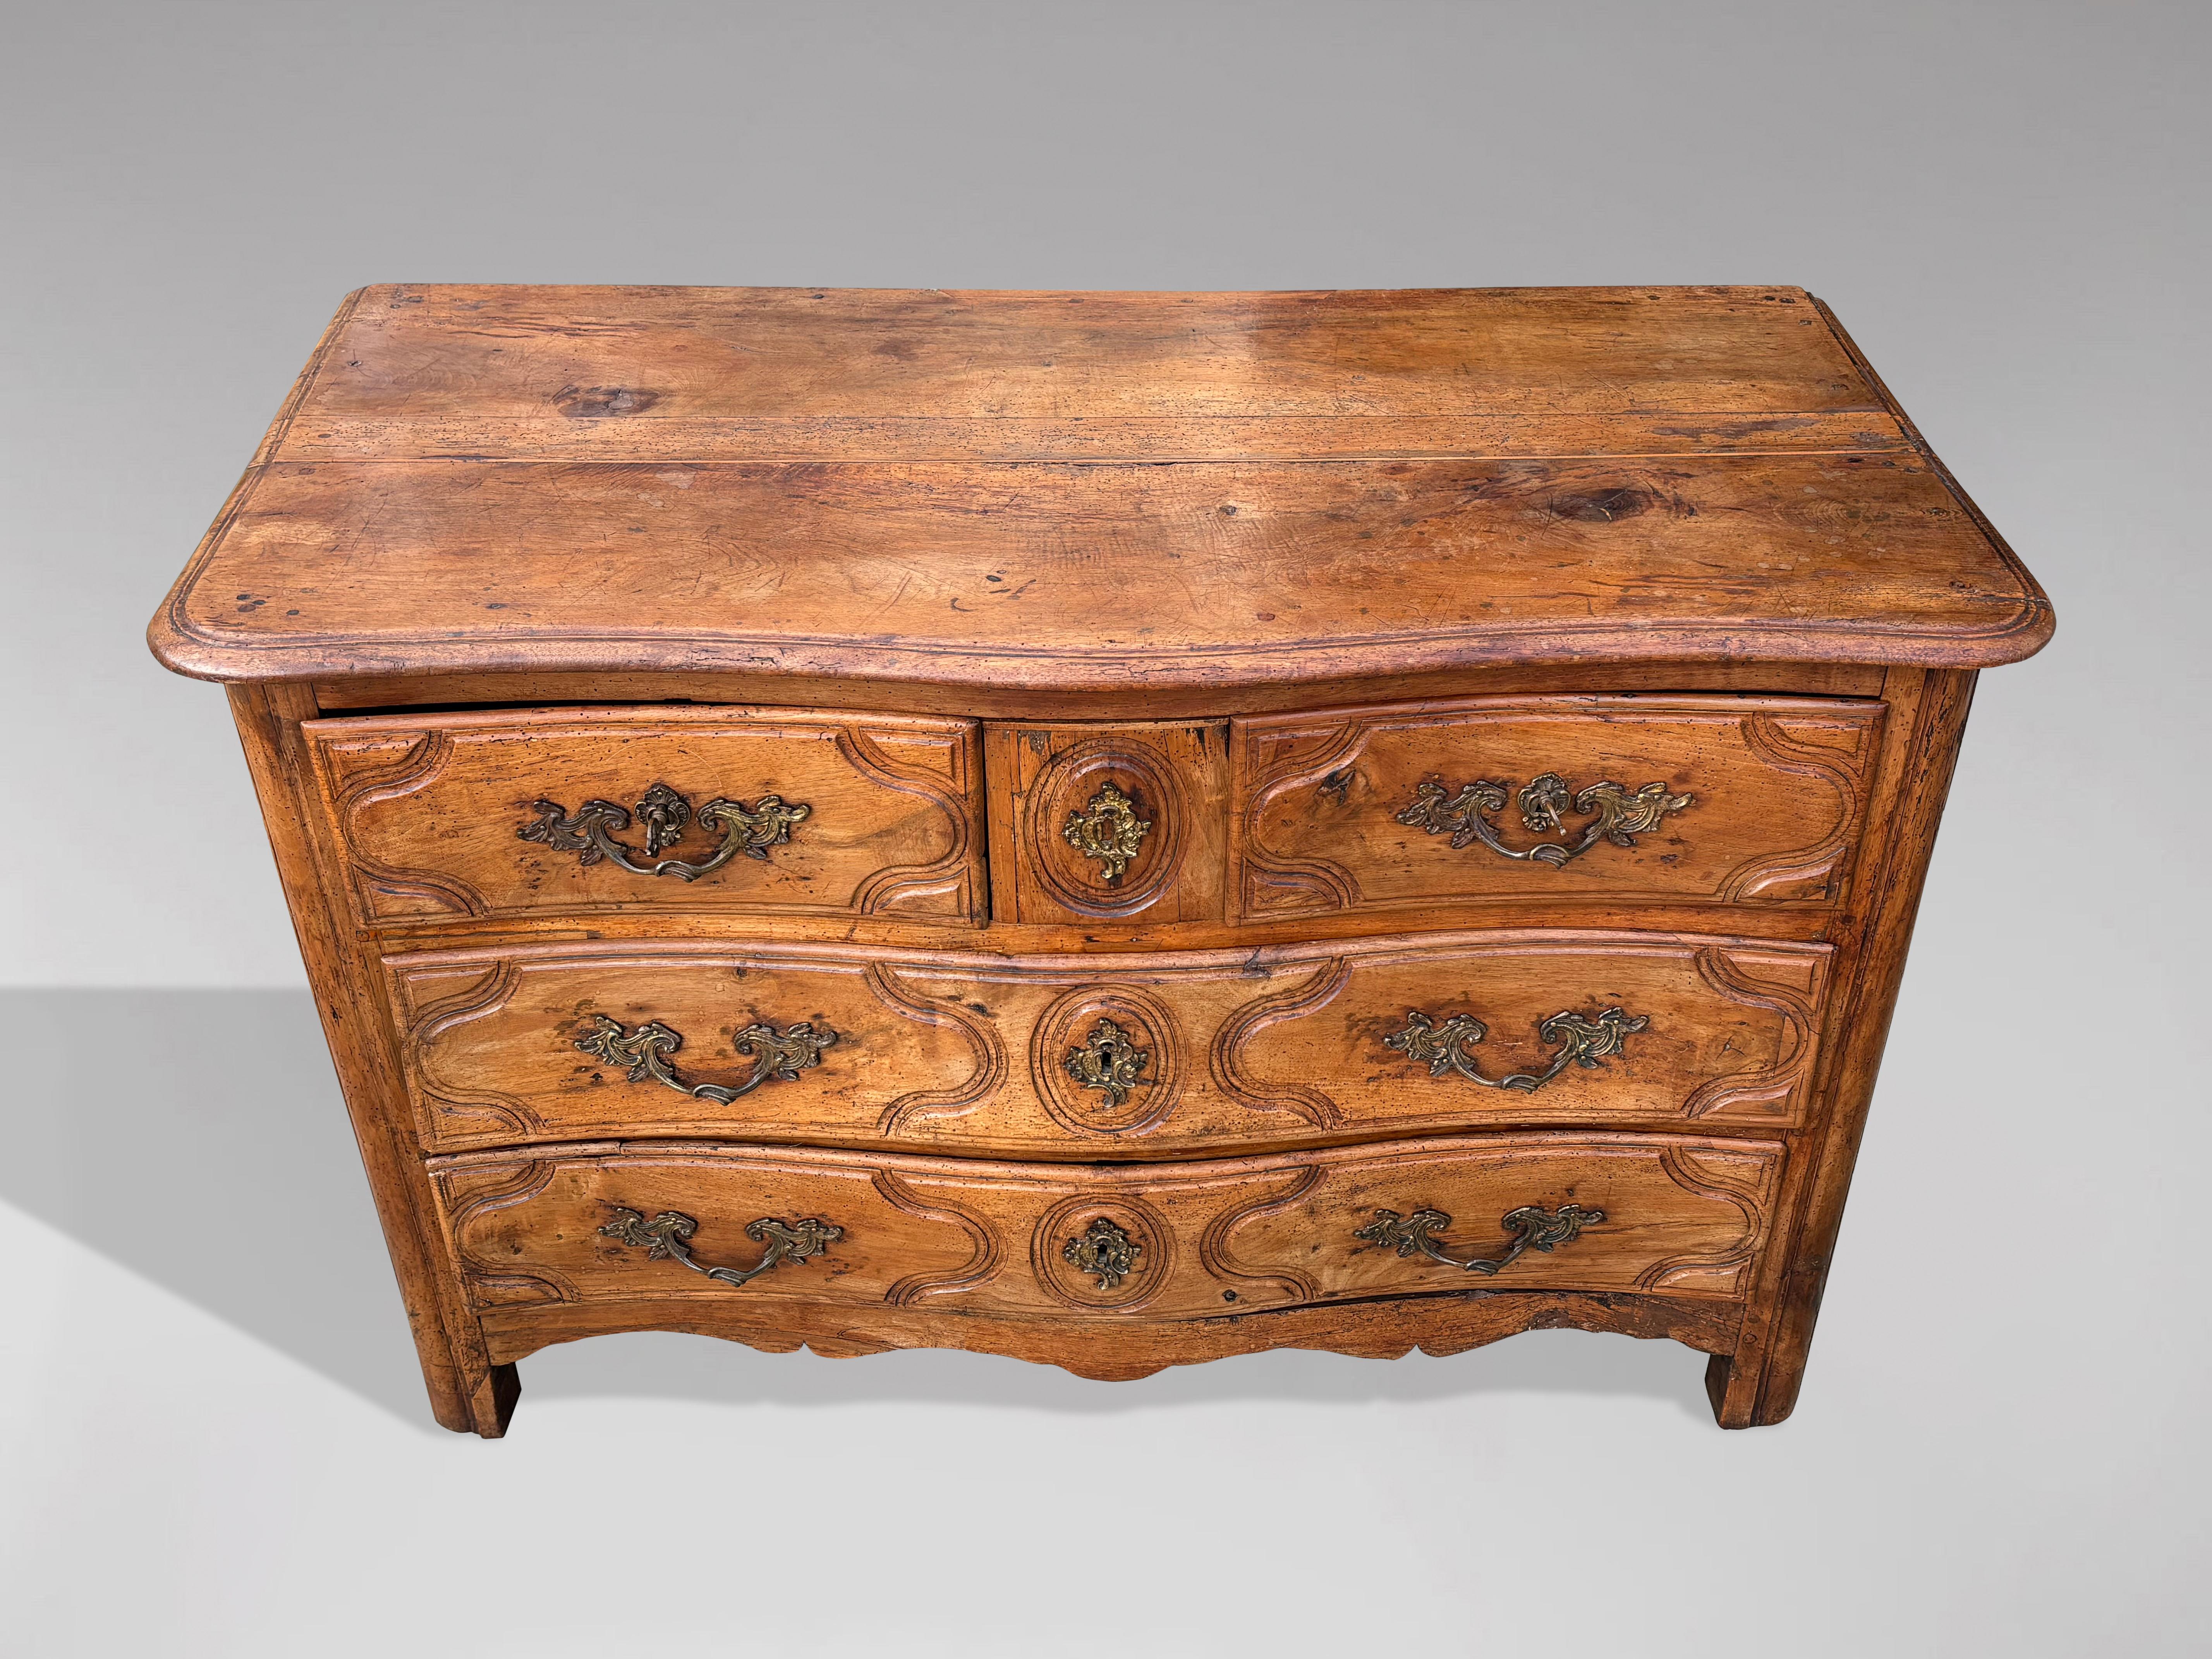 18th Century French Provincial Walnut Commode In Good Condition For Sale In Petworth,West Sussex, GB